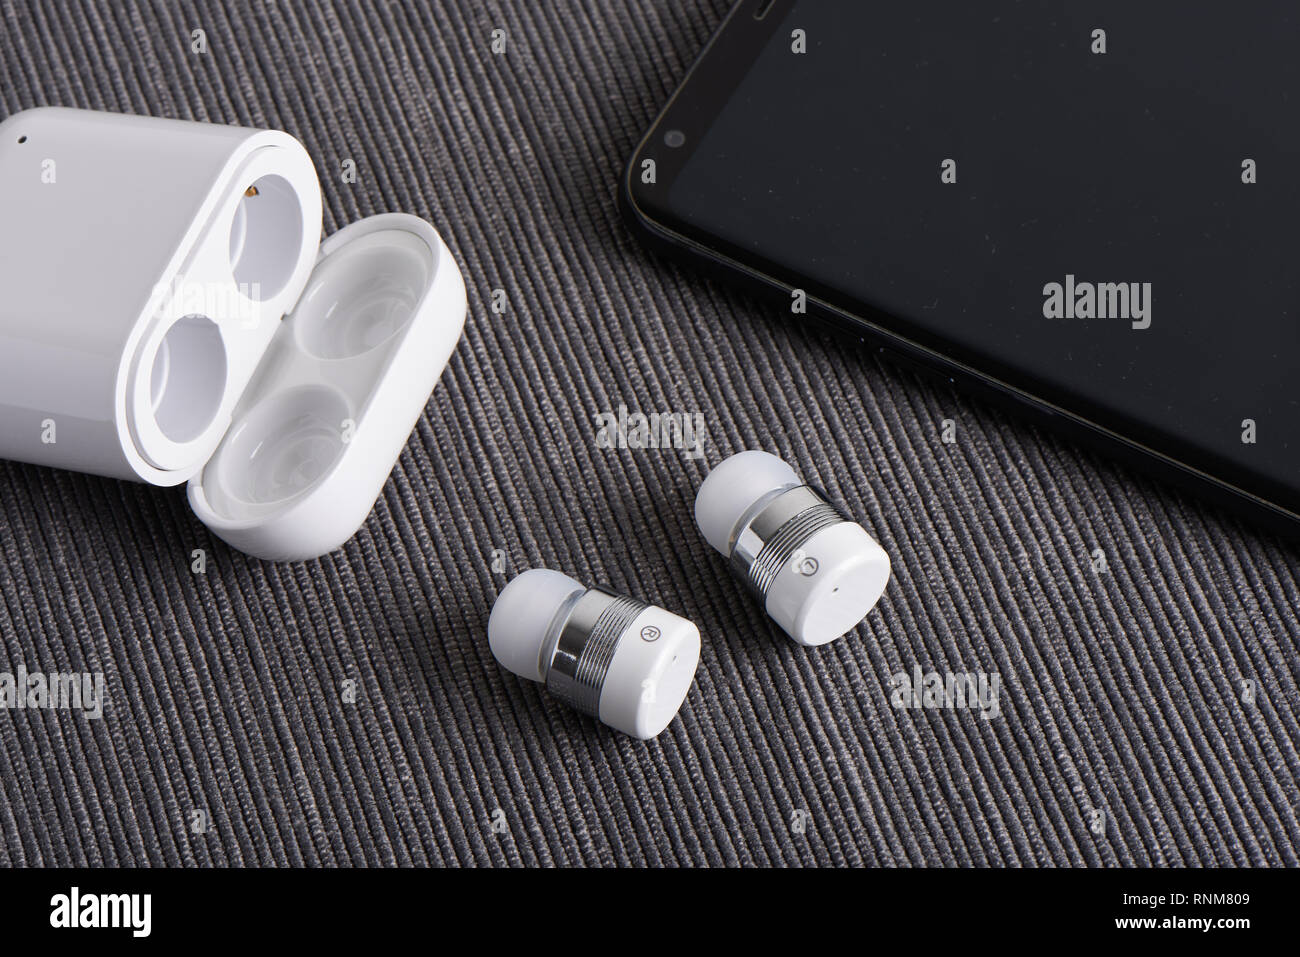 wireless cordless bluetooth earbuds with chargeable case and smartphone Stock Photo